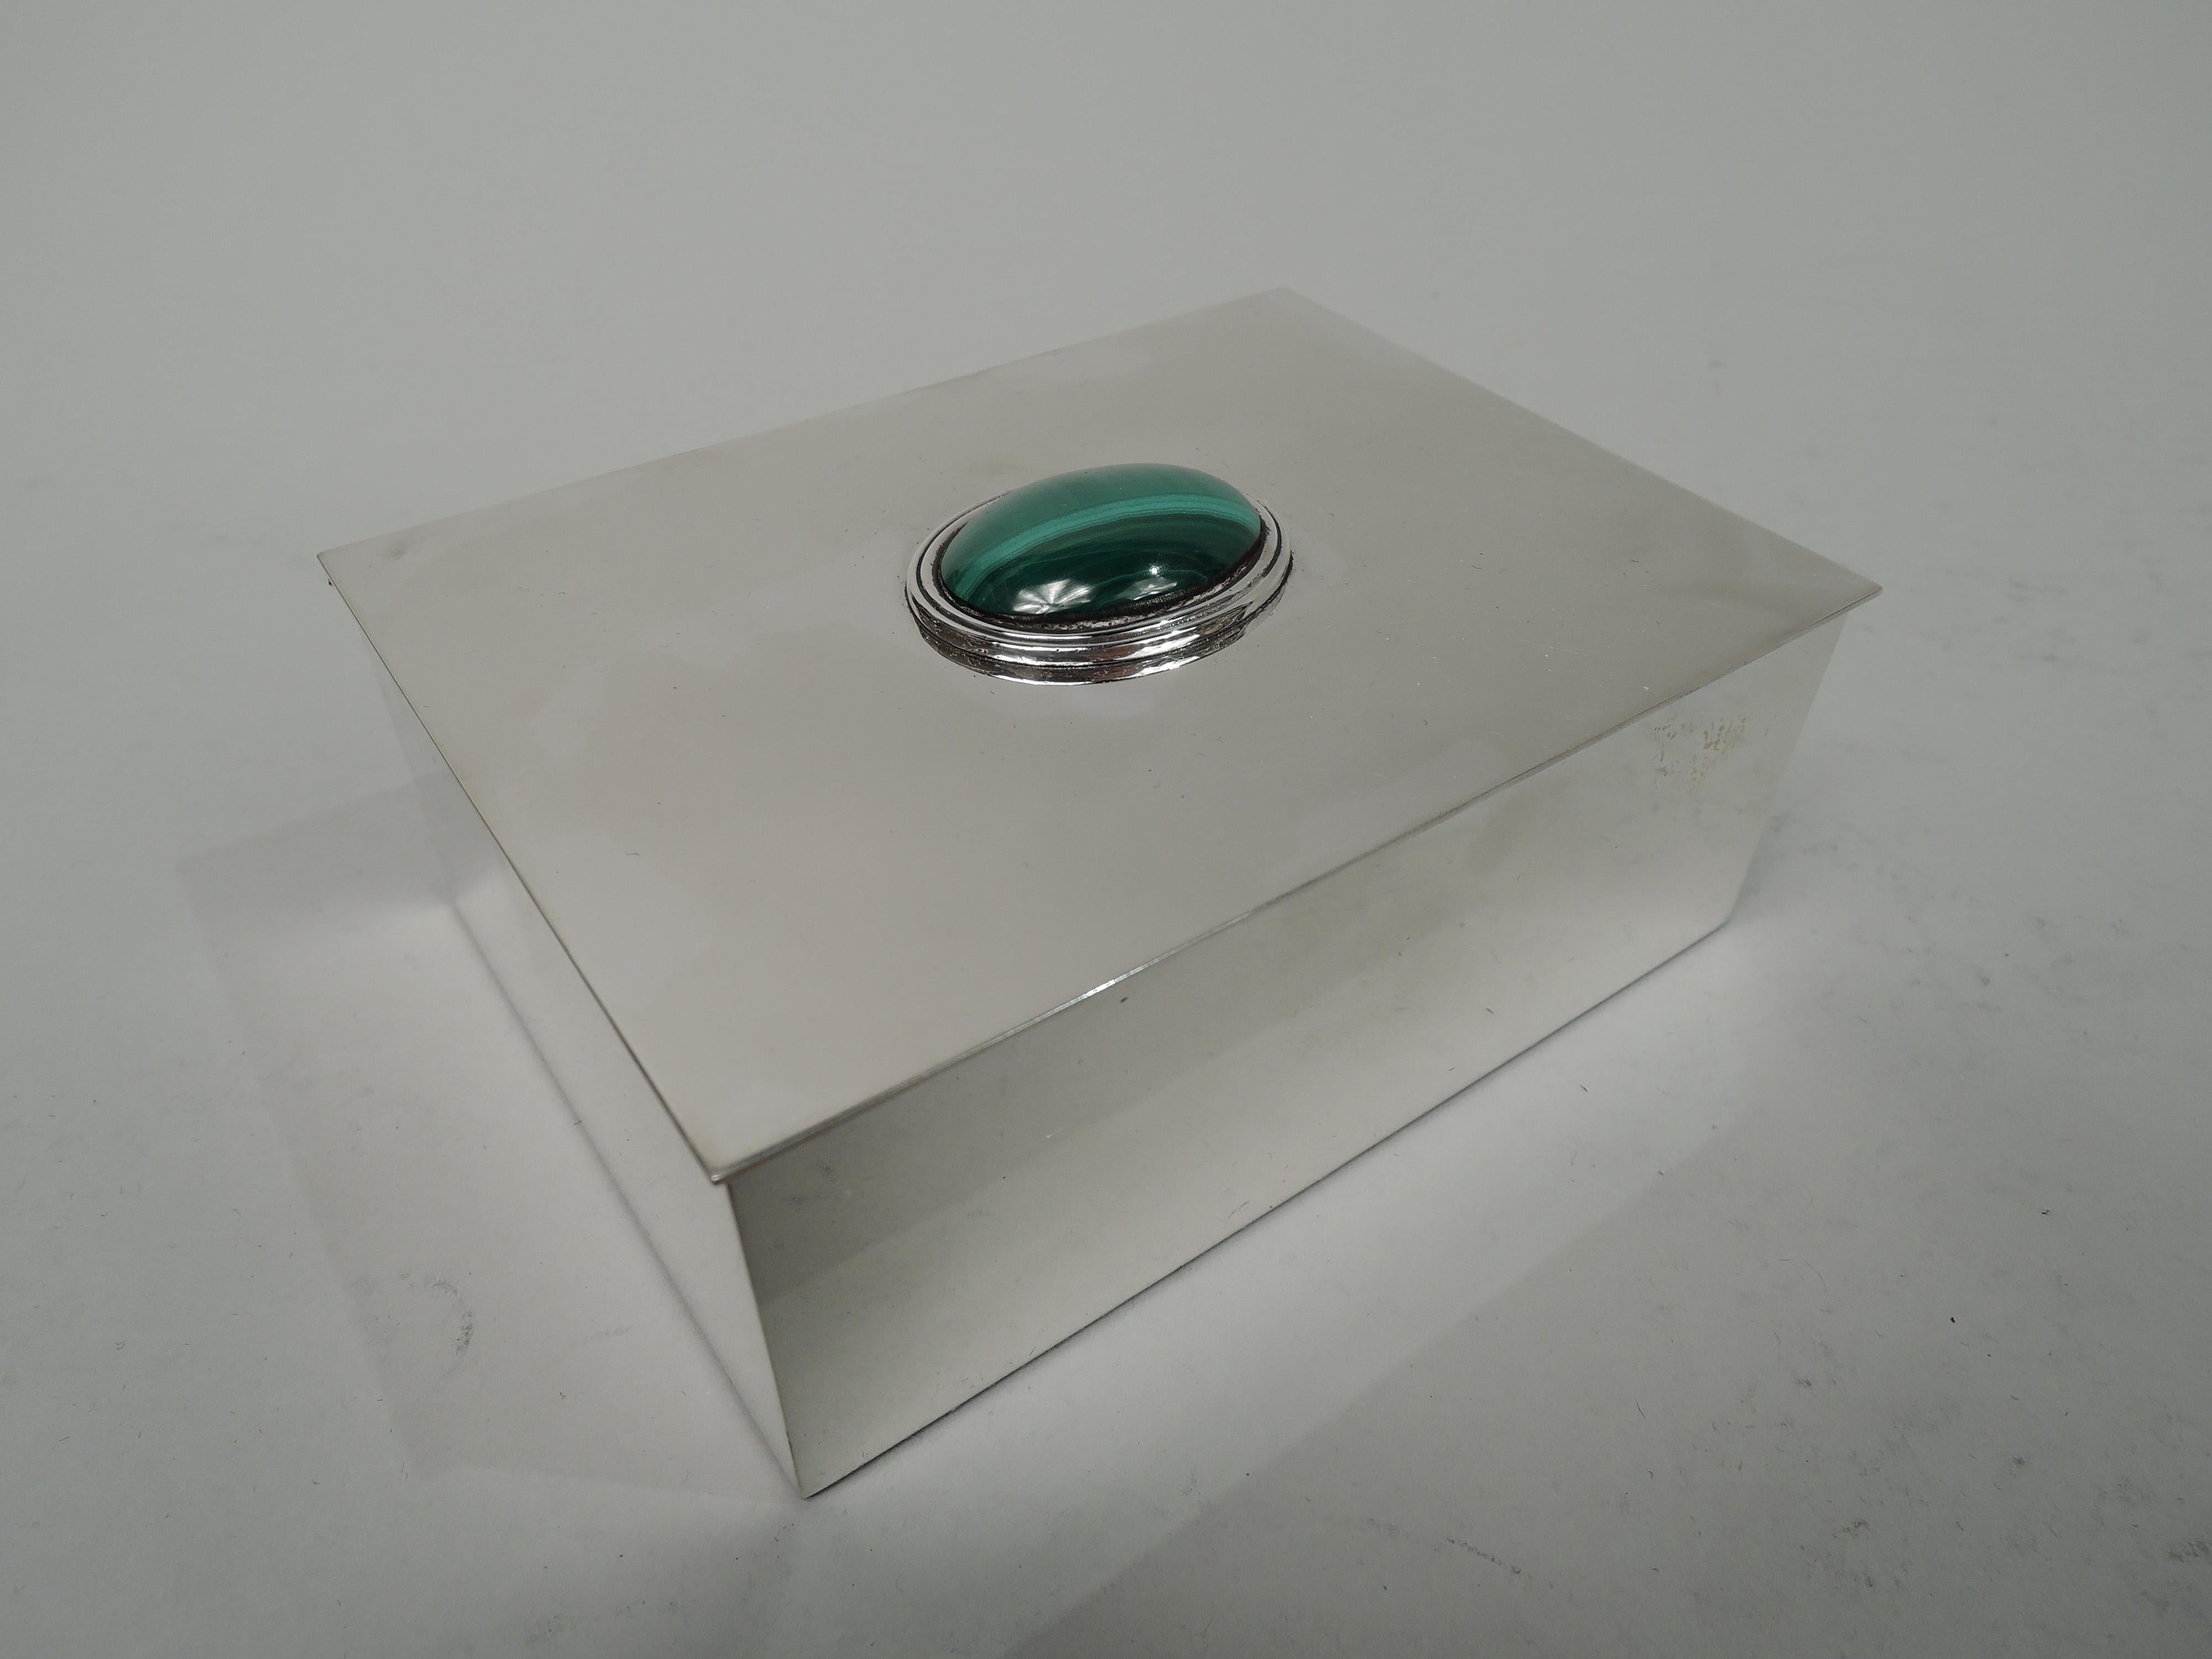 Modern sterling silver box. Retailed by Tiffany & Co. In New York. Rectangular with straight sides and crisp corners. Cover flat and hinged with slight overhang; cabochon malachite oval in reeded mount on cover top. Fully marked including retailer’s